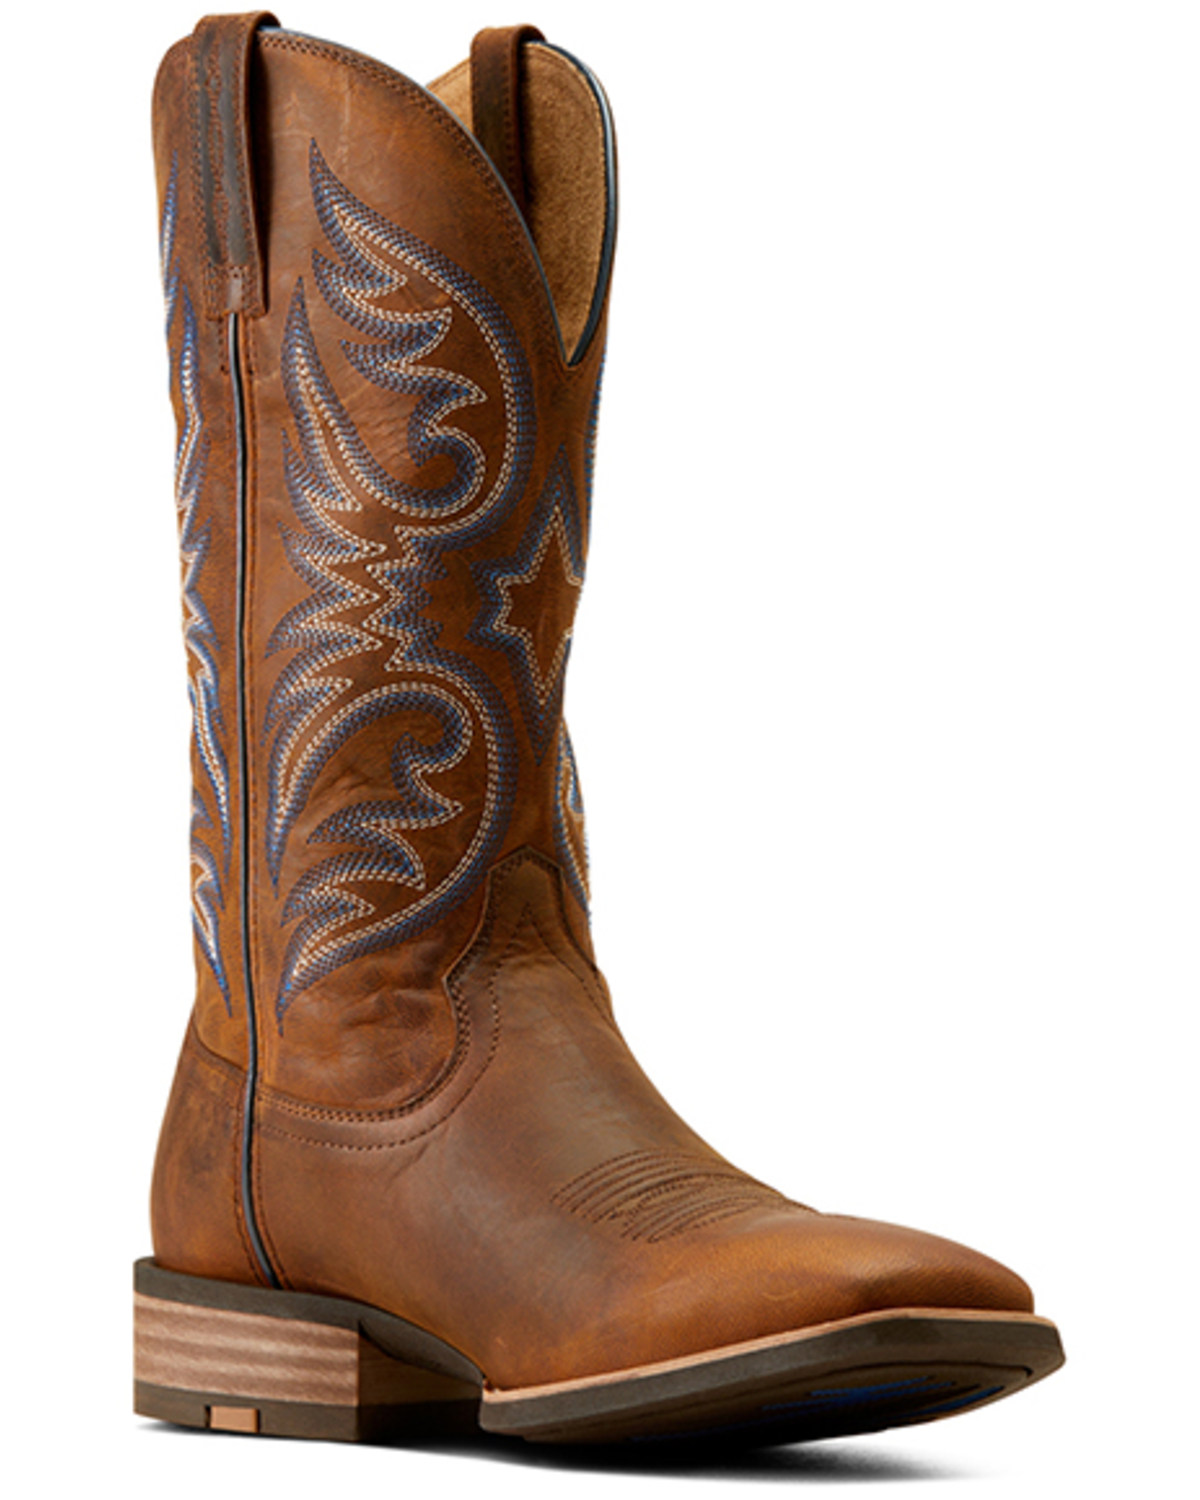 Ariat Men's Ricochet Performance Western Boots - Broad Square Toe